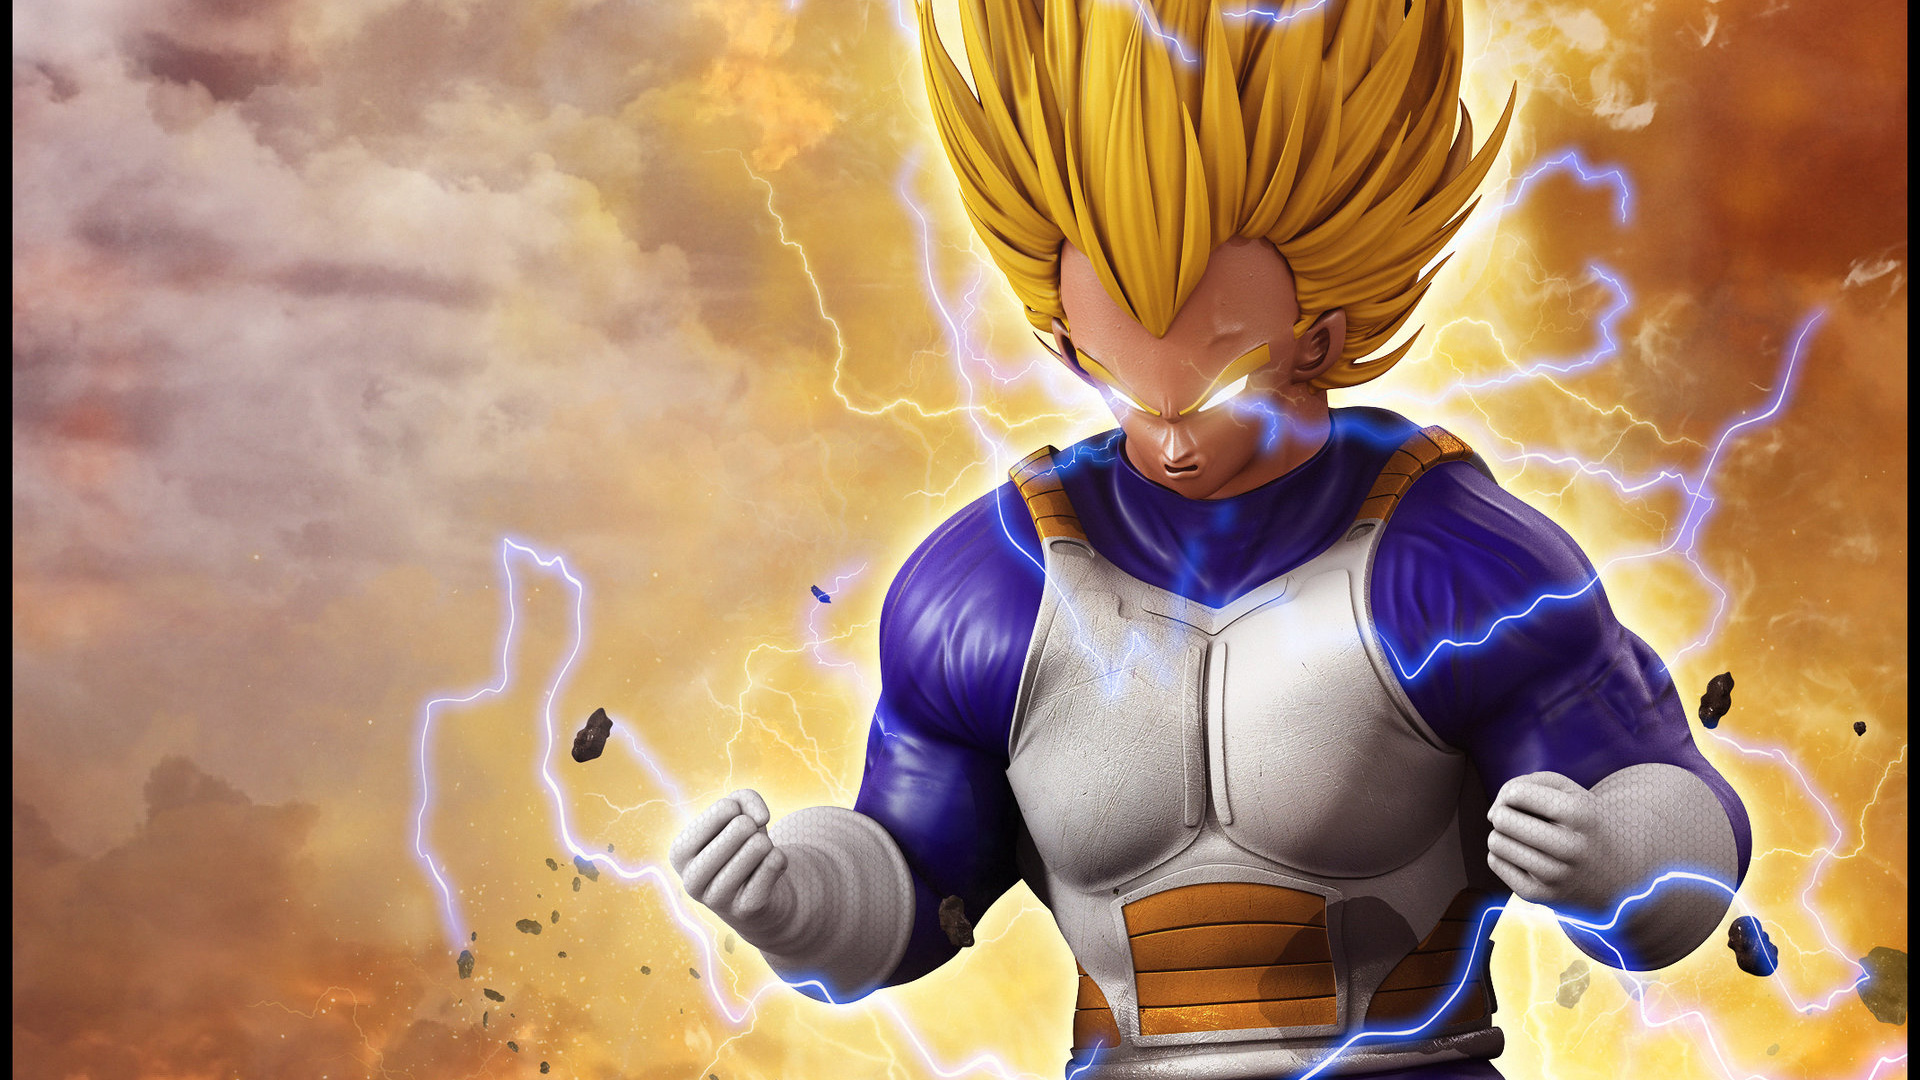 Vegeta 3d Art, HD Anime, 4k Wallpapers, Images, Backgrounds, Photos and